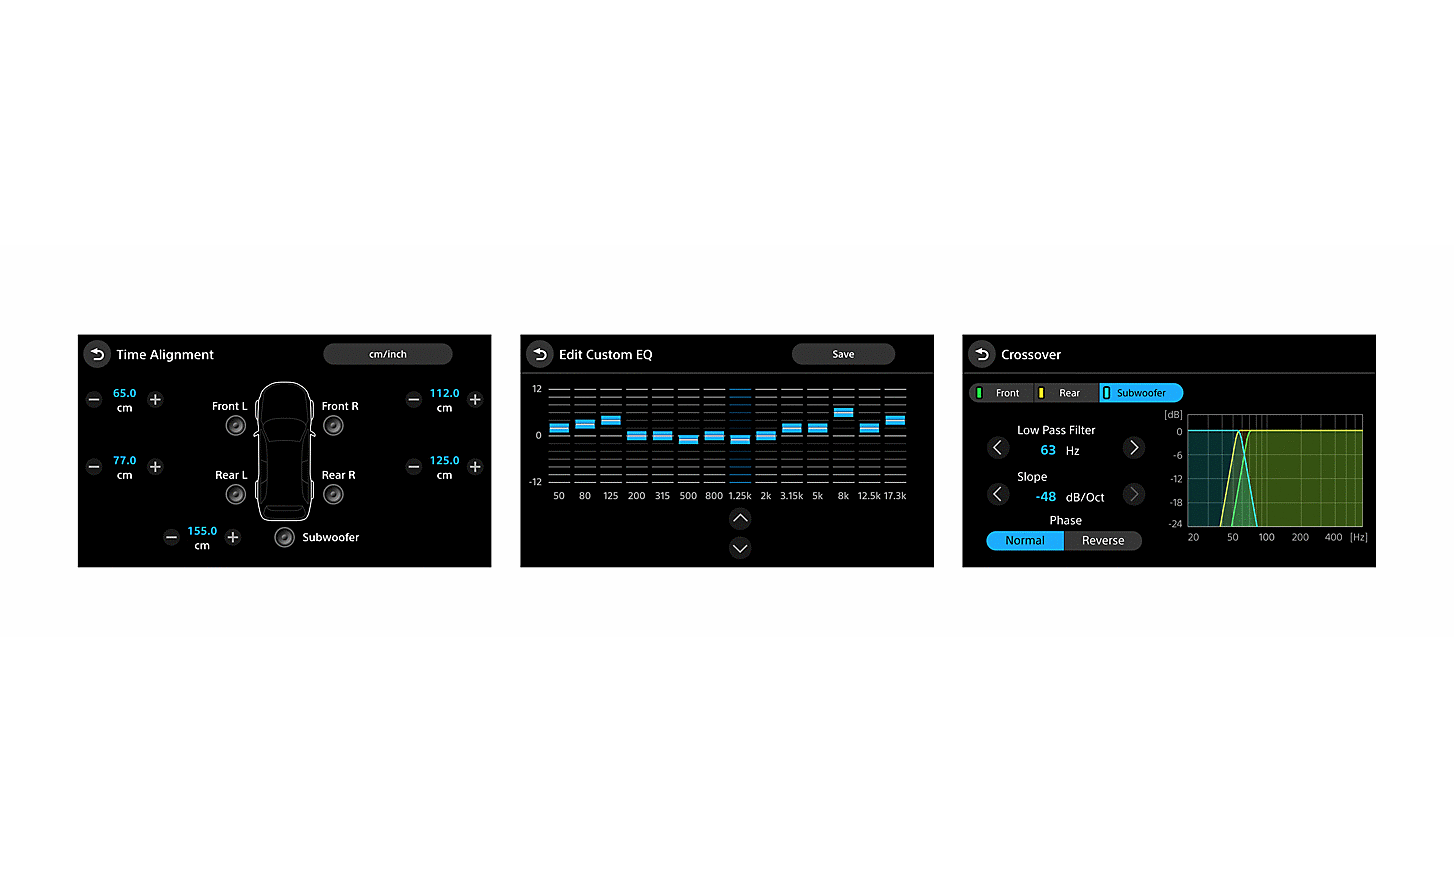 Three images of the sound customisation options screens built-in to the XAV-AX8500.